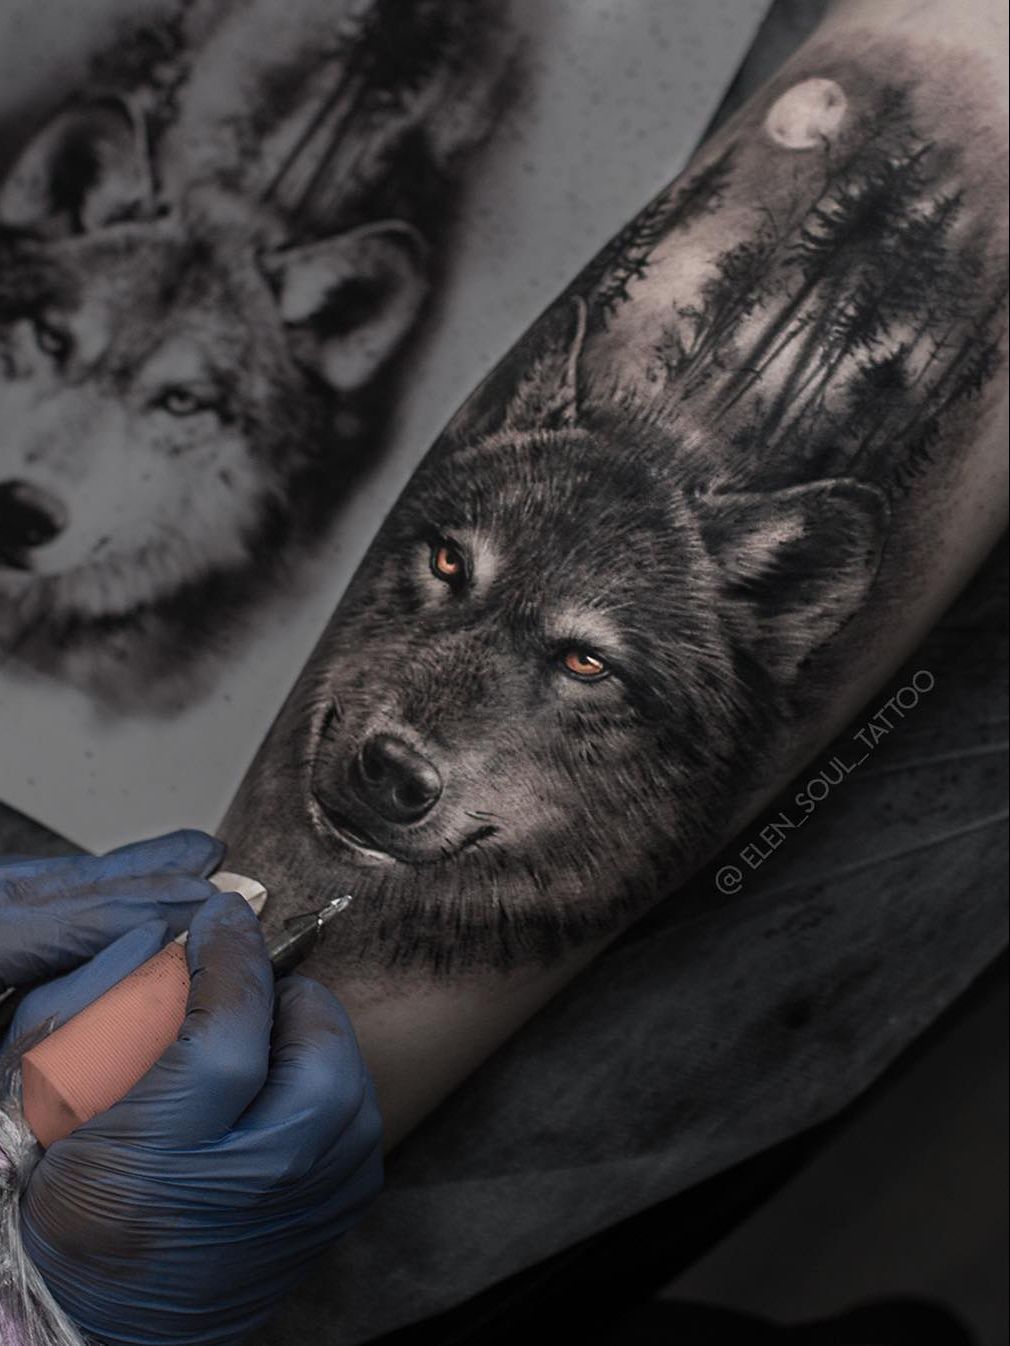 50 Realistic Wolf Tattoo Designs For Men  Canine Ink Ideas  Wolf tattoo  design Wolf tattoo Wolf tattoos men